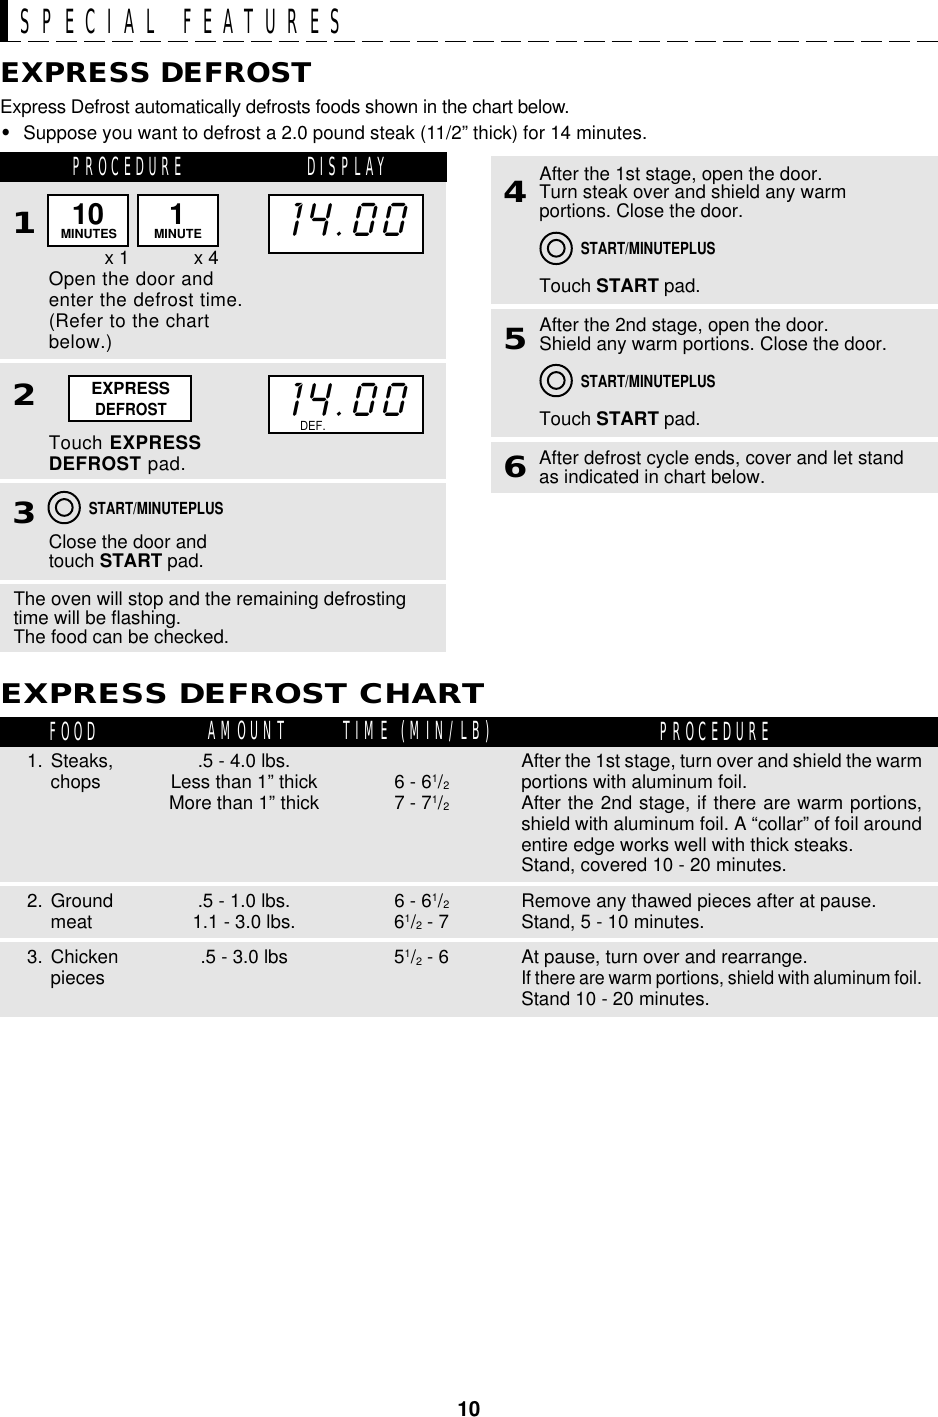 10After the 1st stage, open the door.Turn steak over and shield any warmportions. Close the door.Touch START pad.Express Defrost automatically defrosts foods shown in the chart below.•Suppose you want to defrost a 2.0 pound steak (11/2” thick) for 14 minutes.PROCEDUREOpen the door andenter the defrost time.(Refer to the chartbelow.)1EXPRESS DEFROSTTouch EXPRESSDEFROST pad.2Close the door andtouch START pad.3465The oven will stop and the remaining defrostingtime will be flashing.The food can be checked.After the 2nd stage, open the door.Shield any warm portions. Close the door.Touch START pad.After defrost cycle ends, cover and let standas indicated in chart below.x 1EXPRESS DEFROST CHARTAfter the 1st stage, turn over and shield the warmportions with aluminum foil.After the 2nd stage, if there are warm portions,shield with aluminum foil. A “collar” of foil aroundentire edge works well with thick steaks.Stand, covered 10 - 20 minutes.Remove any thawed pieces after at pause.Stand, 5 - 10 minutes.At pause, turn over and rearrange.If there are warm portions, shield with aluminum foil.Stand 10 - 20 minutes.1. Steaks,chops2. Groundmeat3. ChickenpiecesFOOD PROCEDUREAMOUNTx 4EXPRESSDEFROST14.00START/MINUTEPLUSSTART/MINUTEPLUSSTART/MINUTEPLUS6 - 61/27 - 71/26 - 61/261/2 - 751/2 - 6TIME (MIN/LB).5 - 4.0 lbs.Less than 1” thickMore than 1” thick.5 - 1.0 lbs.1.1 - 3.0 lbs..5 - 3.0 lbsDISPLAYSPECIAL FEATURES10MINUTES 1MINUTE14.00DEF.